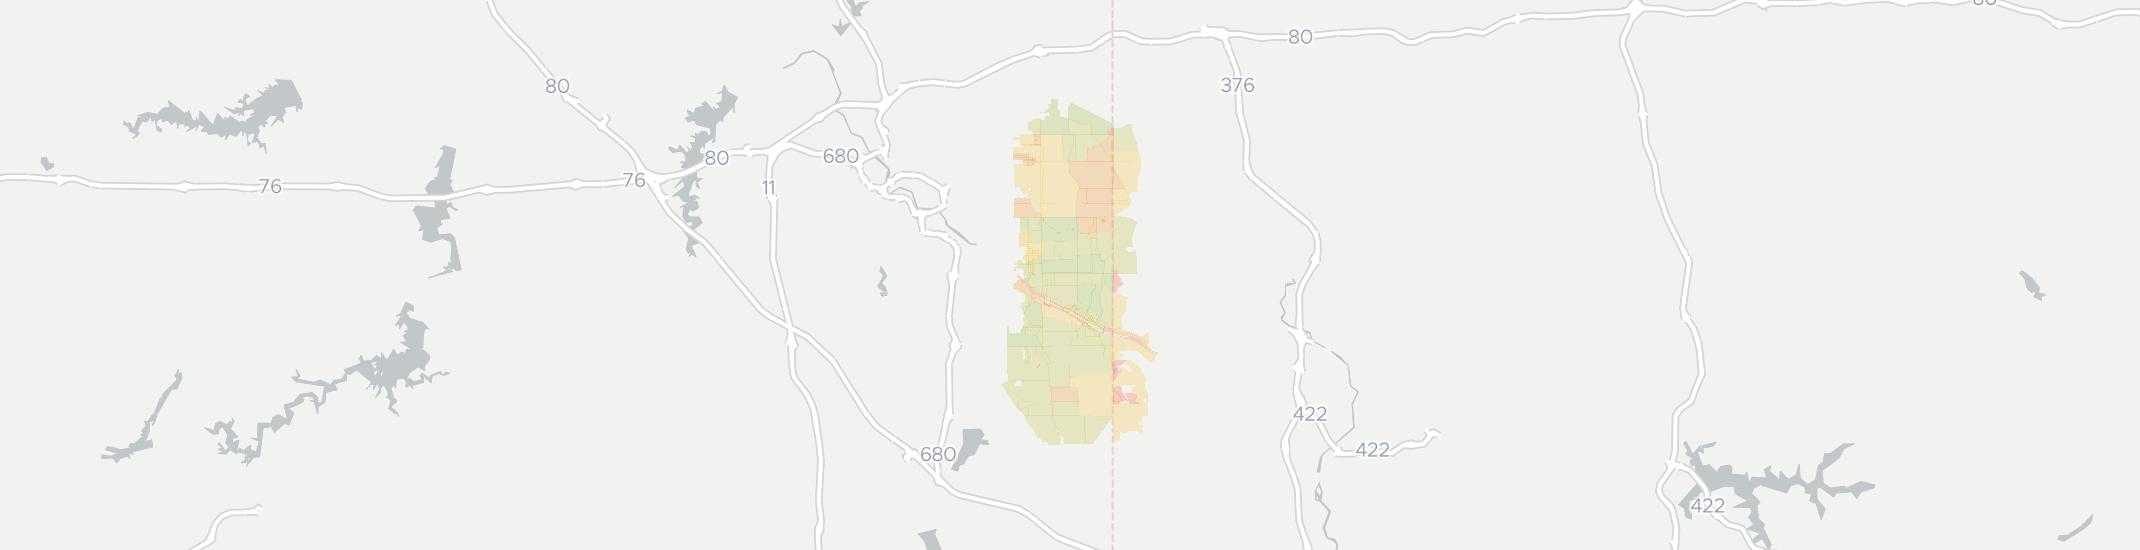 Lowellville Internet Competition Map. Click for interactive map.